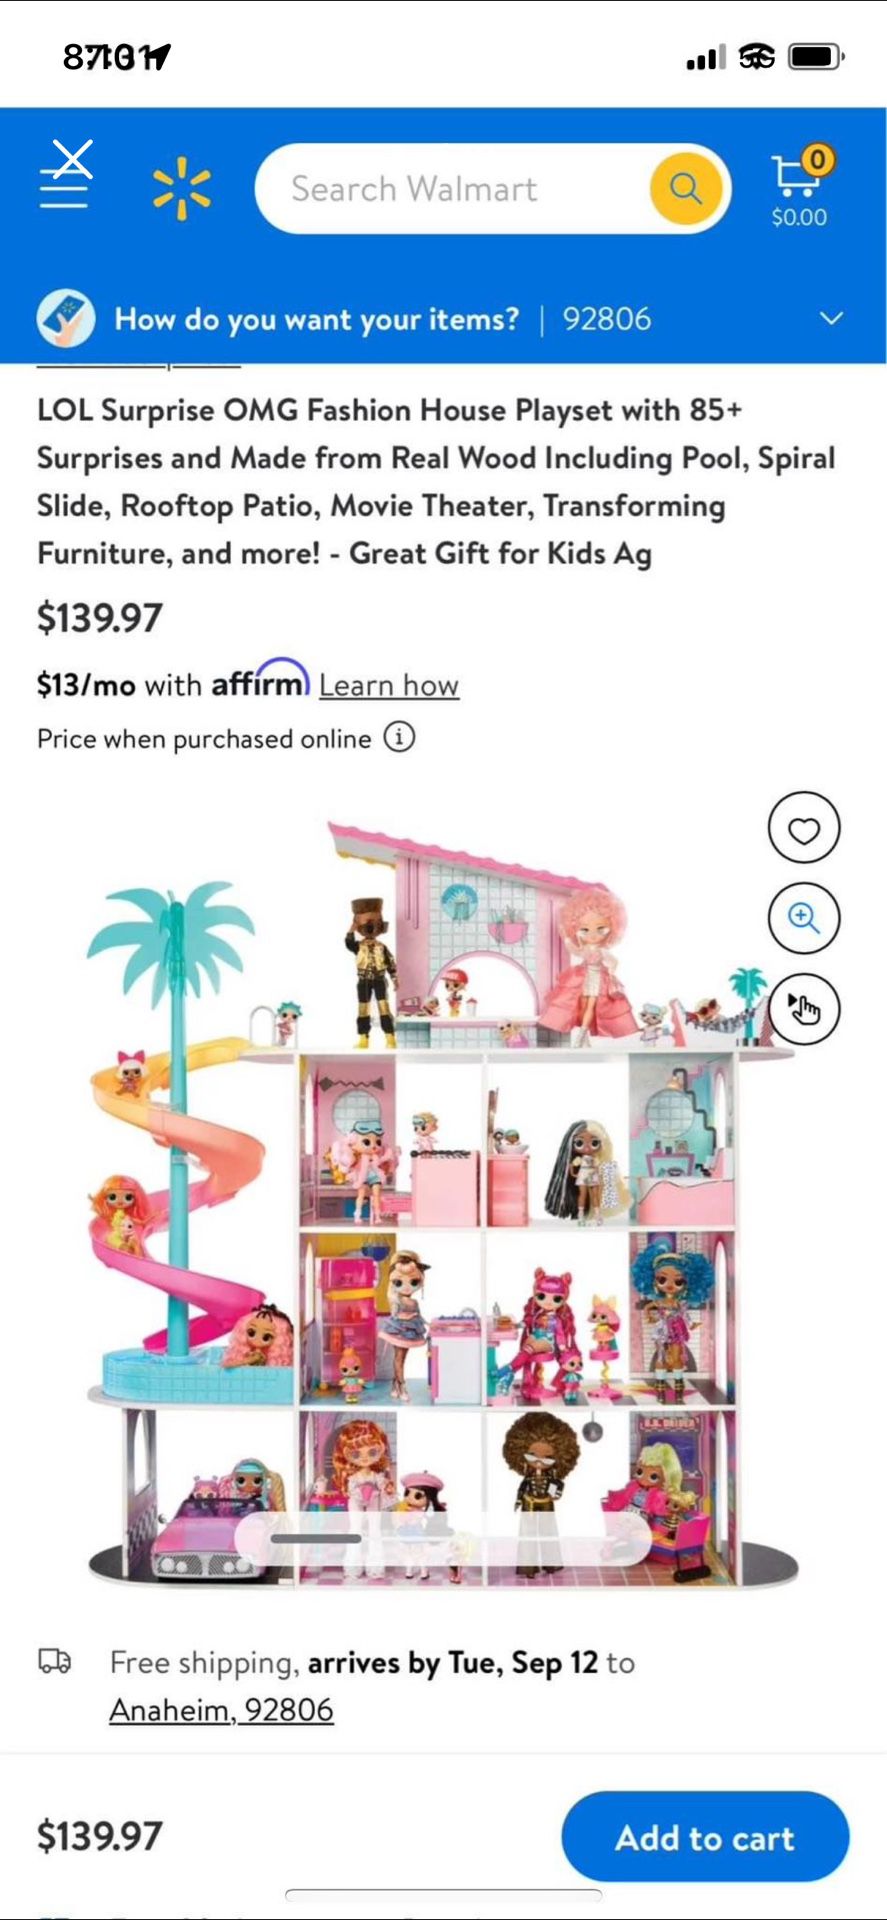 LOL Surprise OMG Fashion House Playset with 85+ Surprises and Made from Real Wood Including Pool, Sp